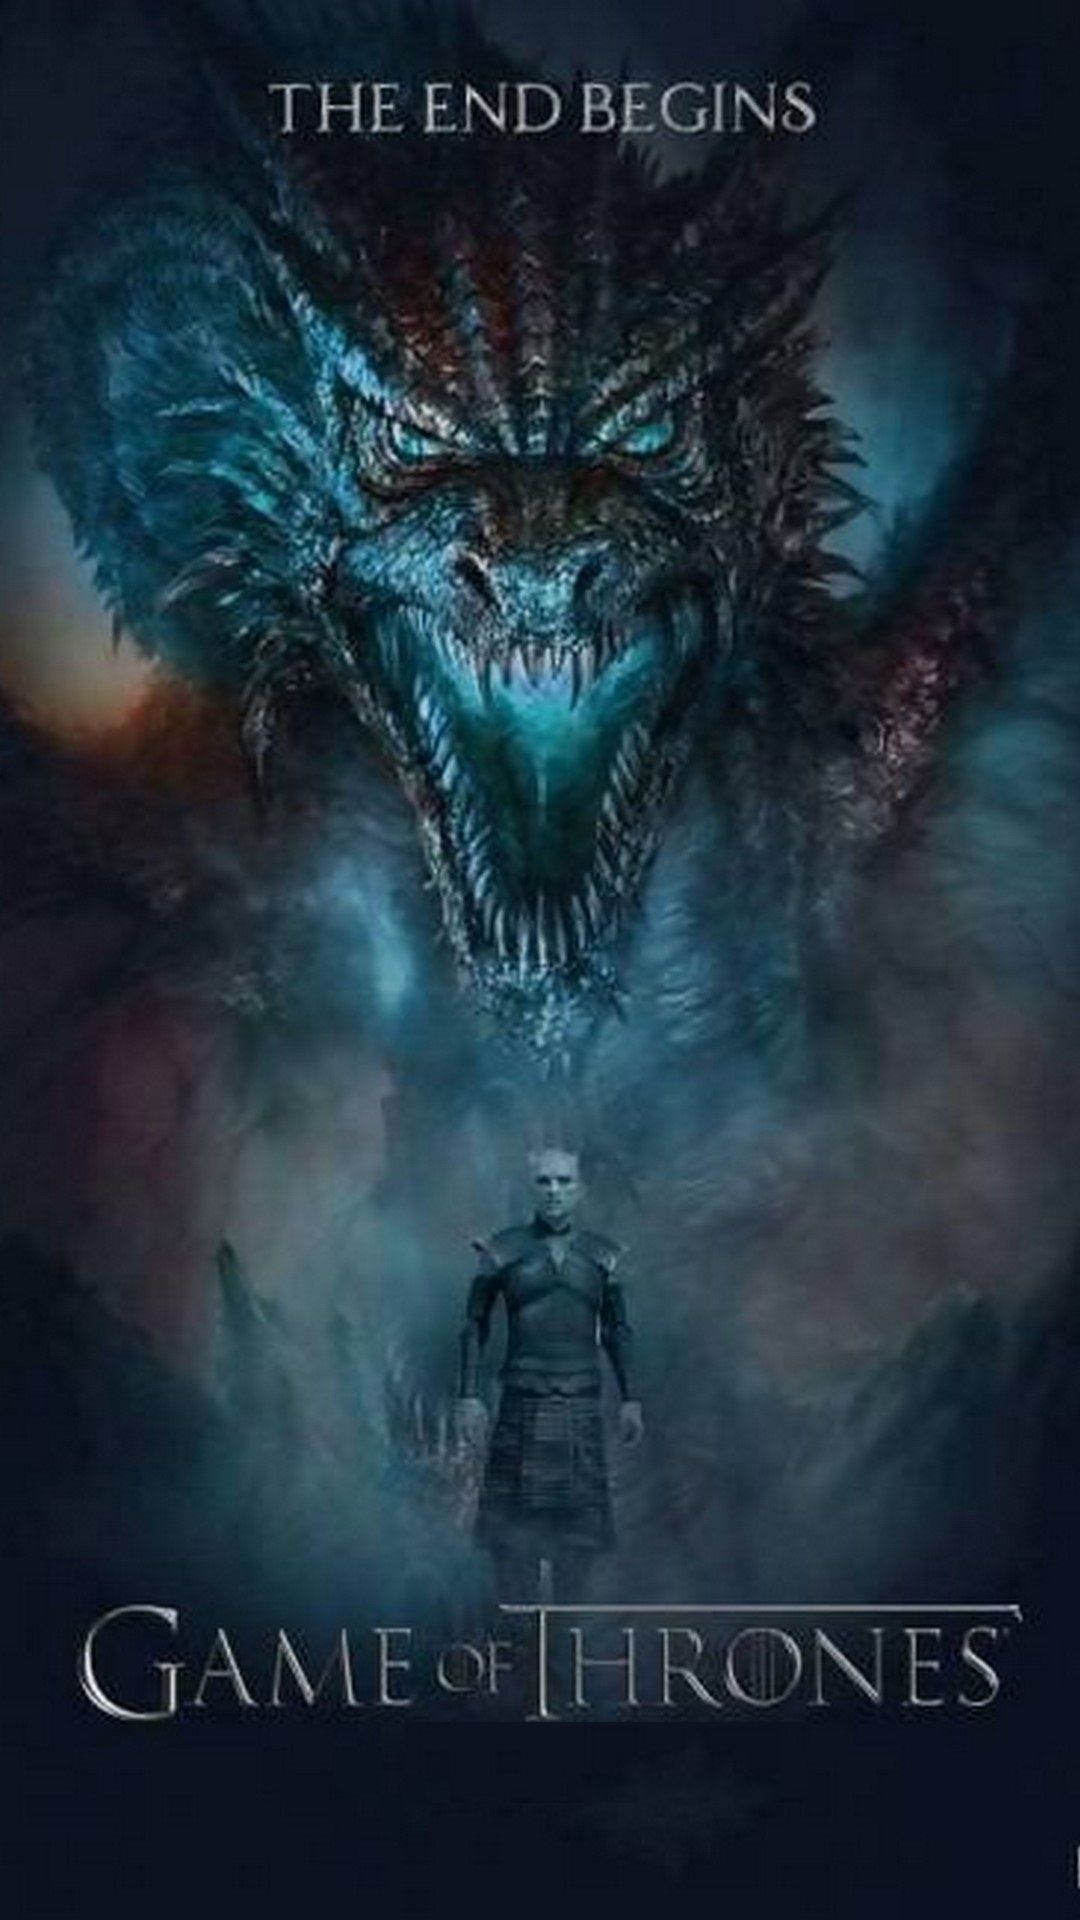 Wallpaper iPhone Game of Thrones Dragons Wallies19 Game of